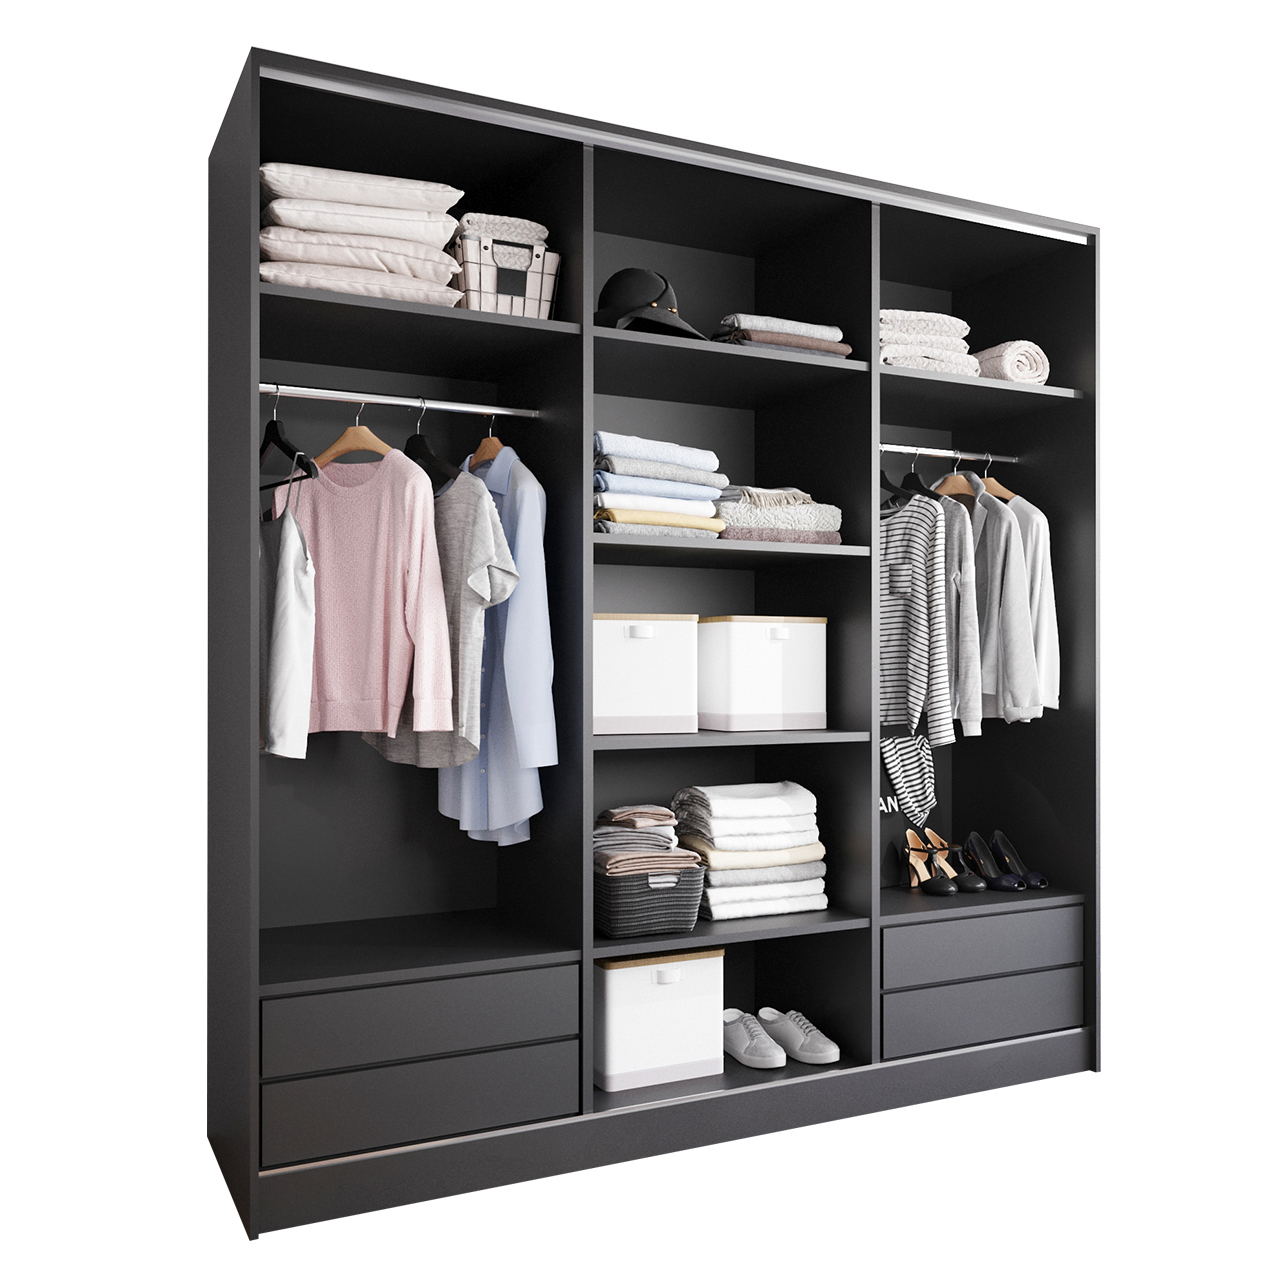 Sliding Wardrobe with Mirror and Drawers GRANO D 200 black